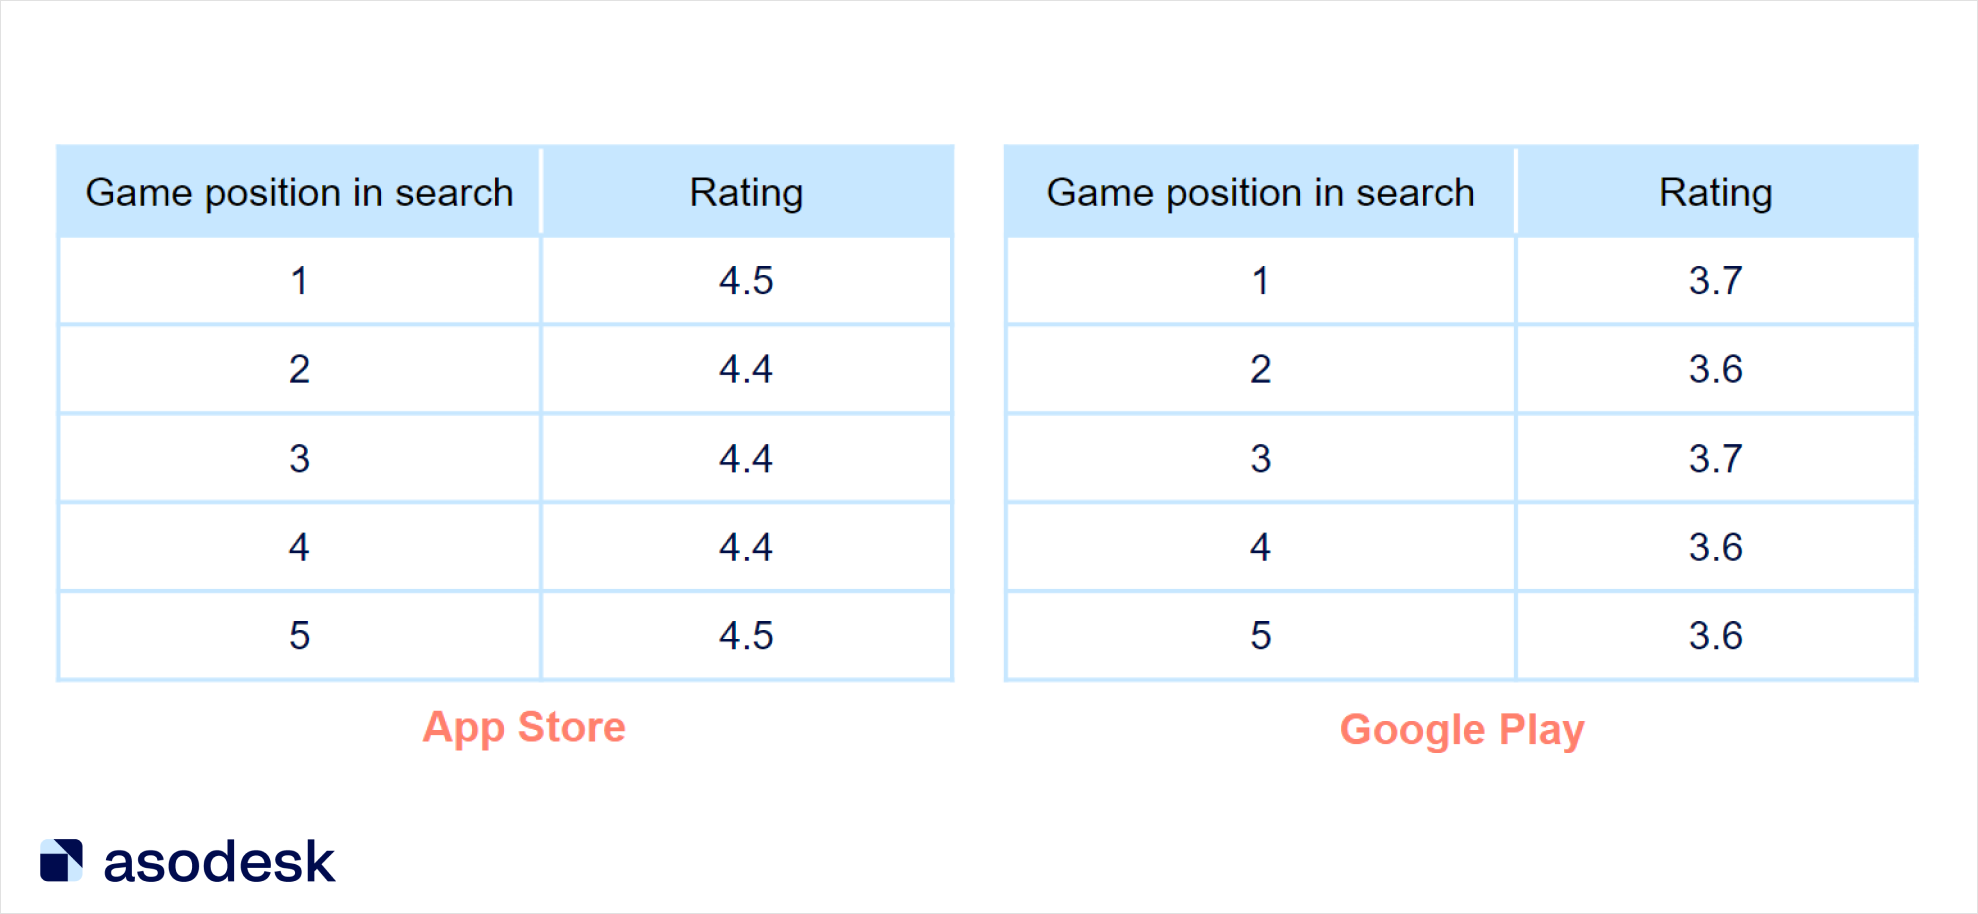 Apps from the top of search in App Store have high rating, while in Google Play thay have medium rating